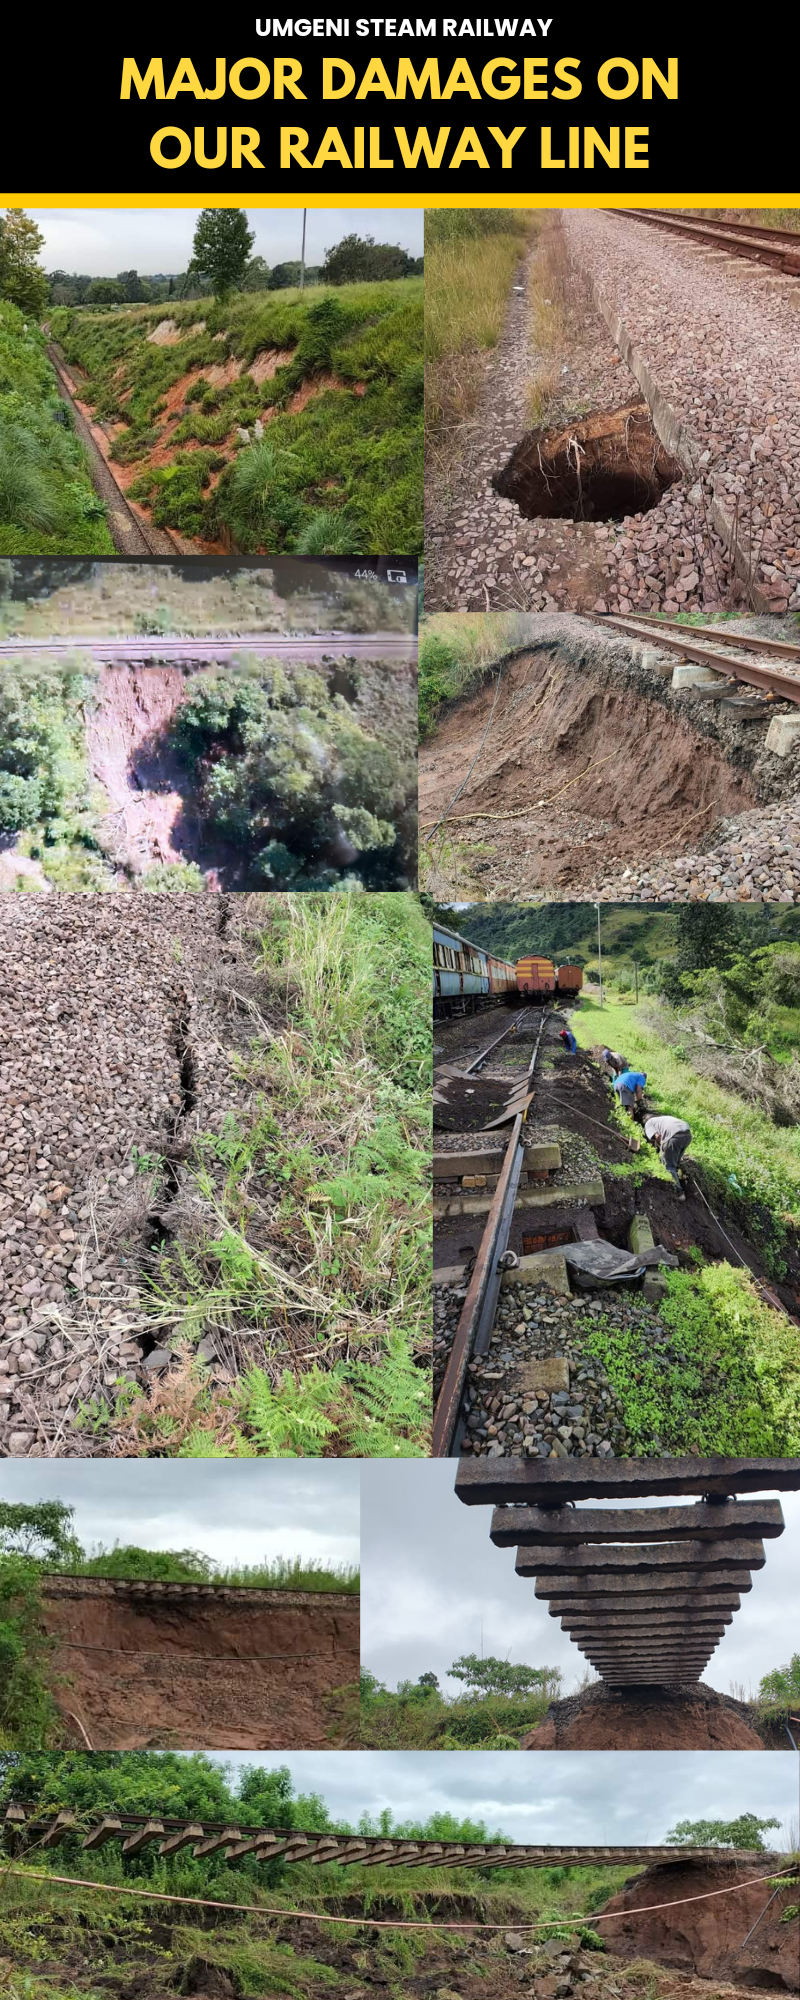 Major Damages on our Railway Line